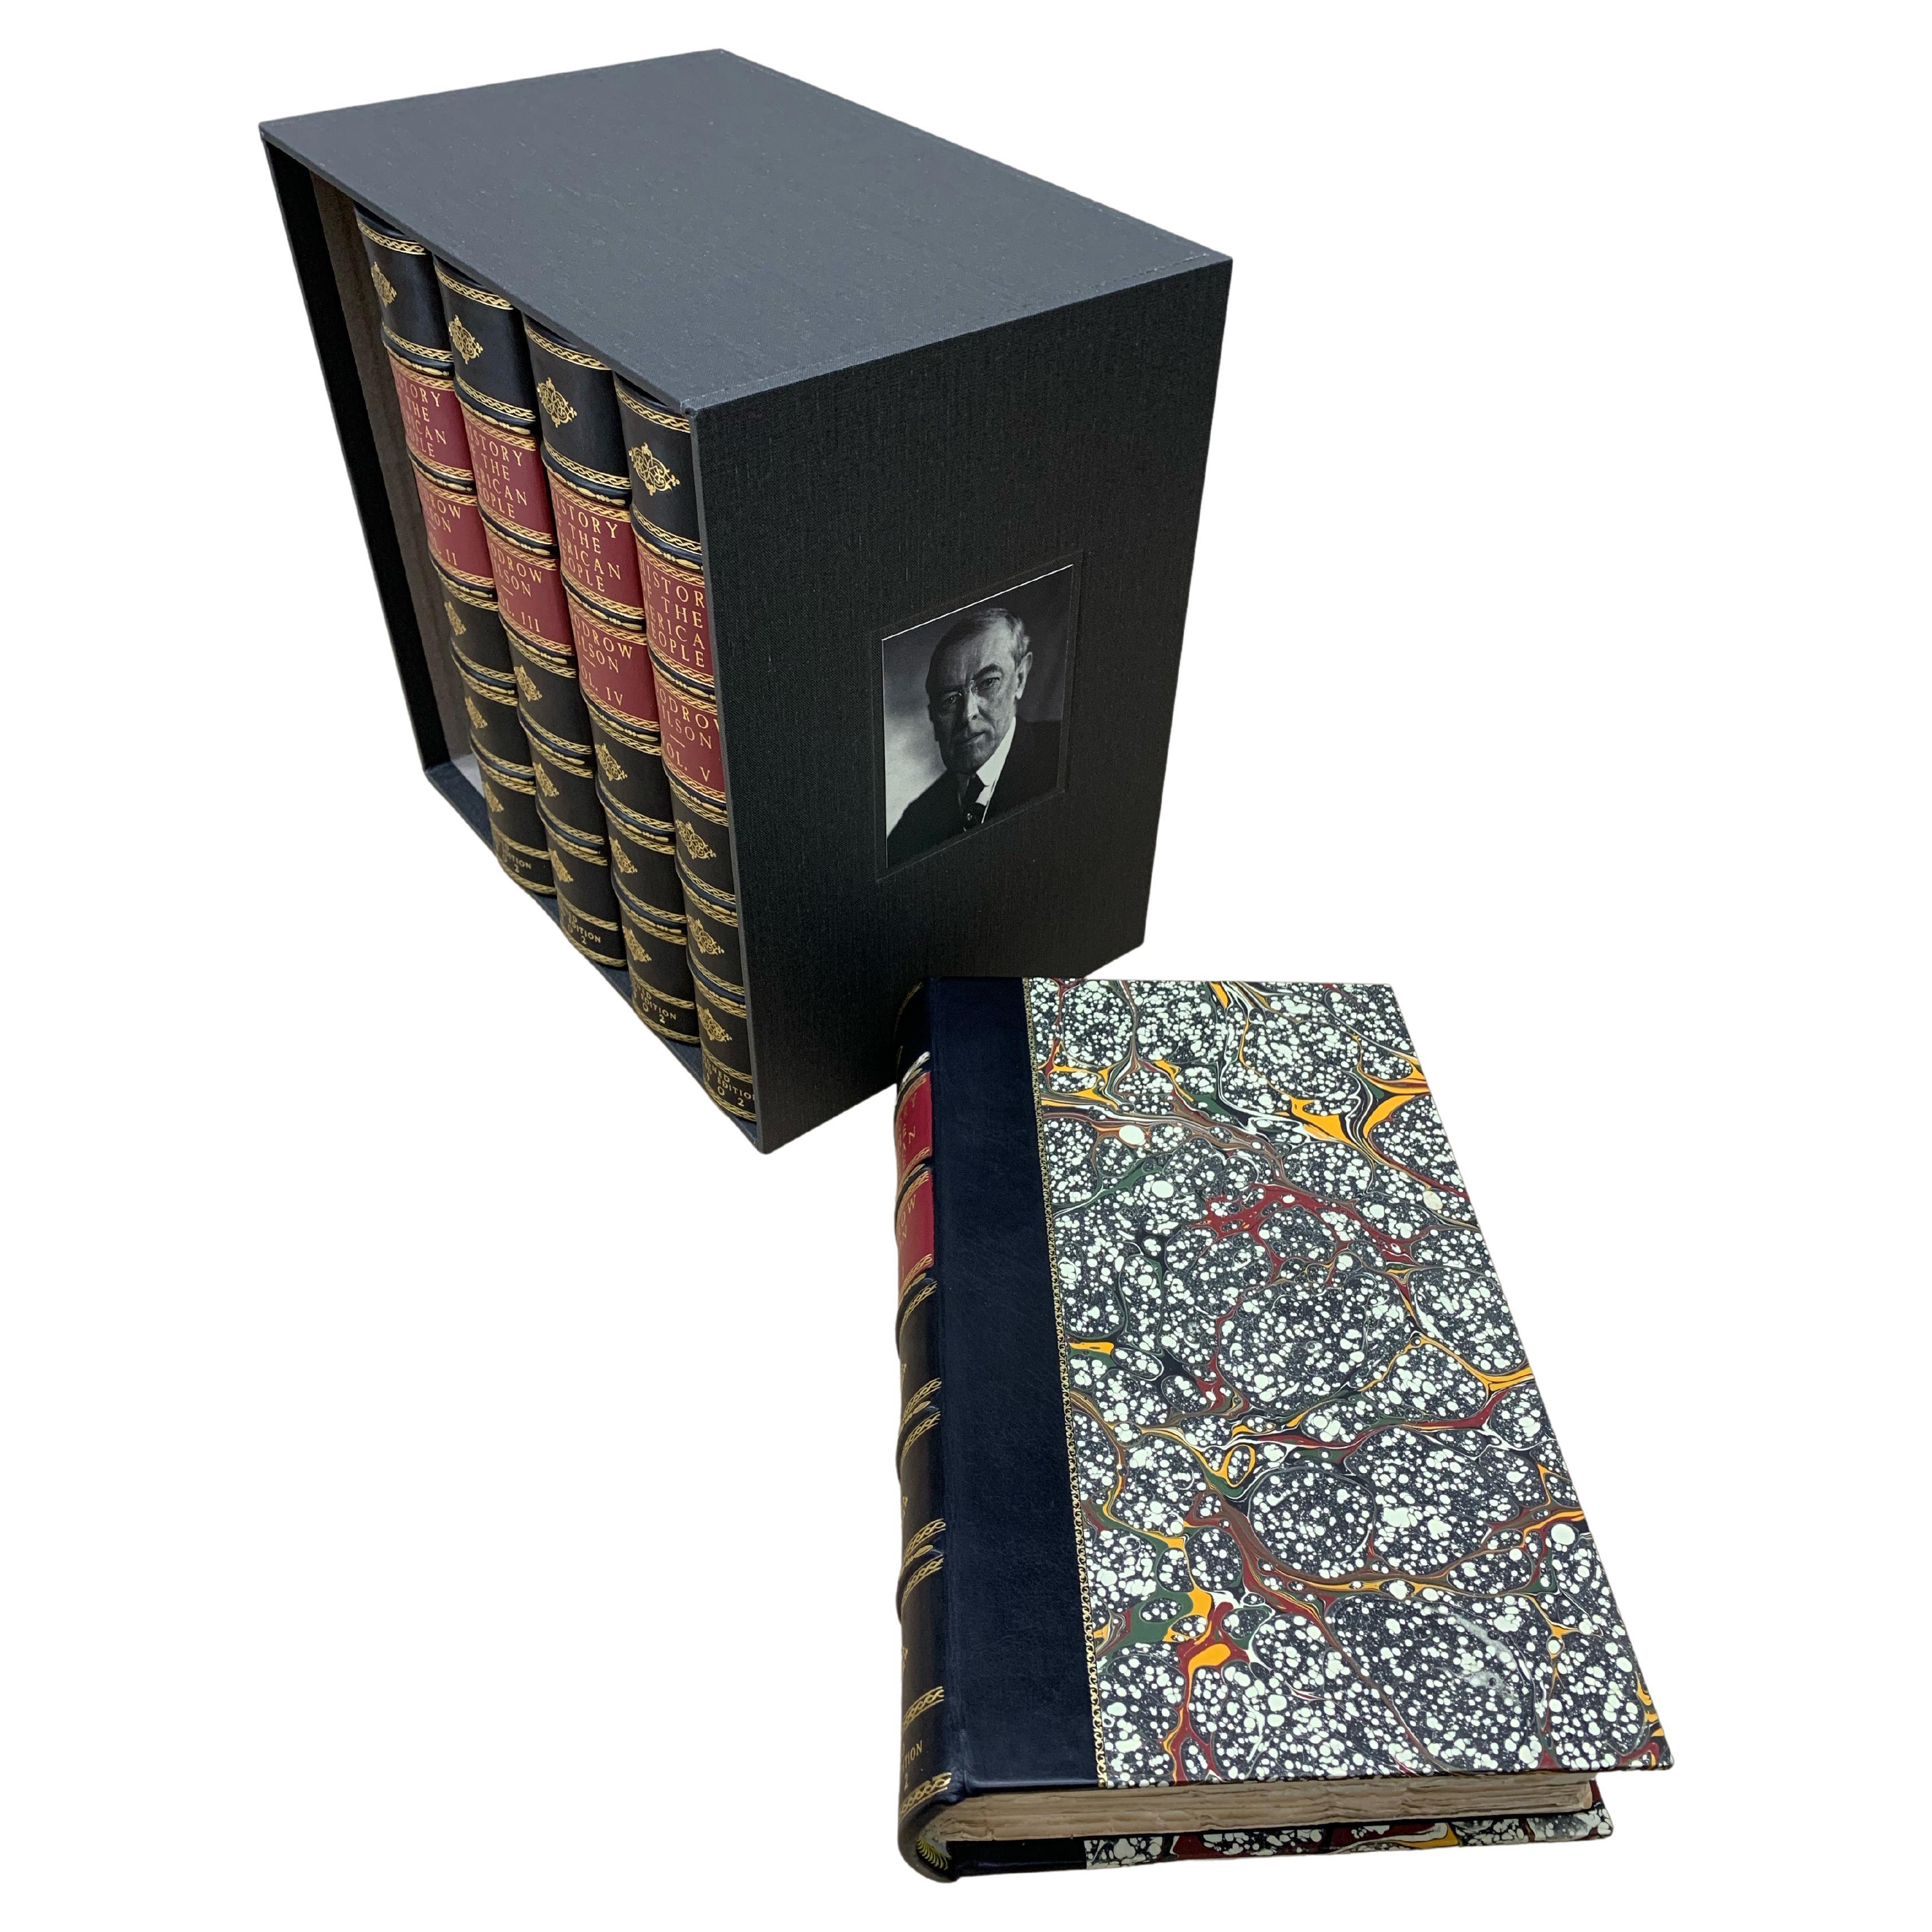 Woodrow Wilson. A History of the American People. New York: Harper & Brothers, 1902. Alumni Edition #29 of 350 copies. Volume I signed by Woodrow Wilson on limitation page. 5 Volumes. Large octavos. Rebound in ¼ leather and marbled paper sides, with